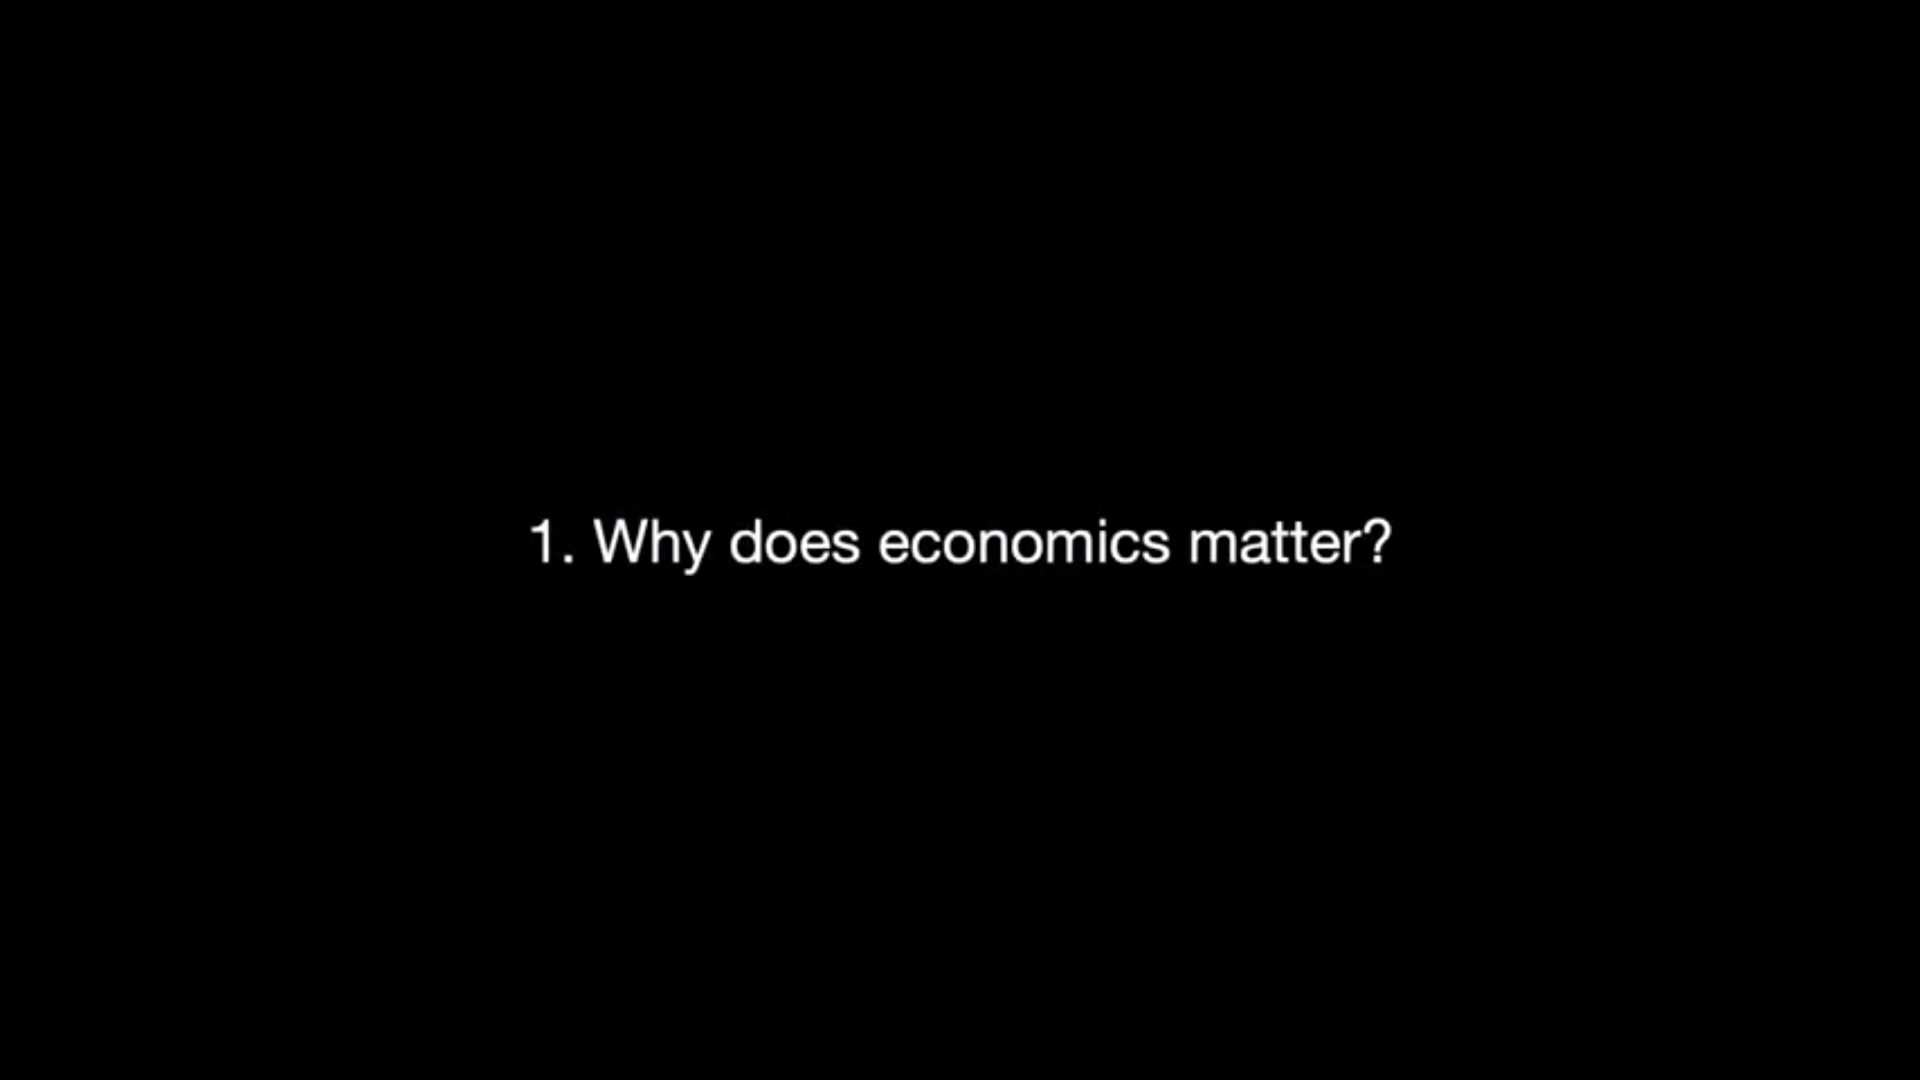 
Why does economics matter? - First trailer

